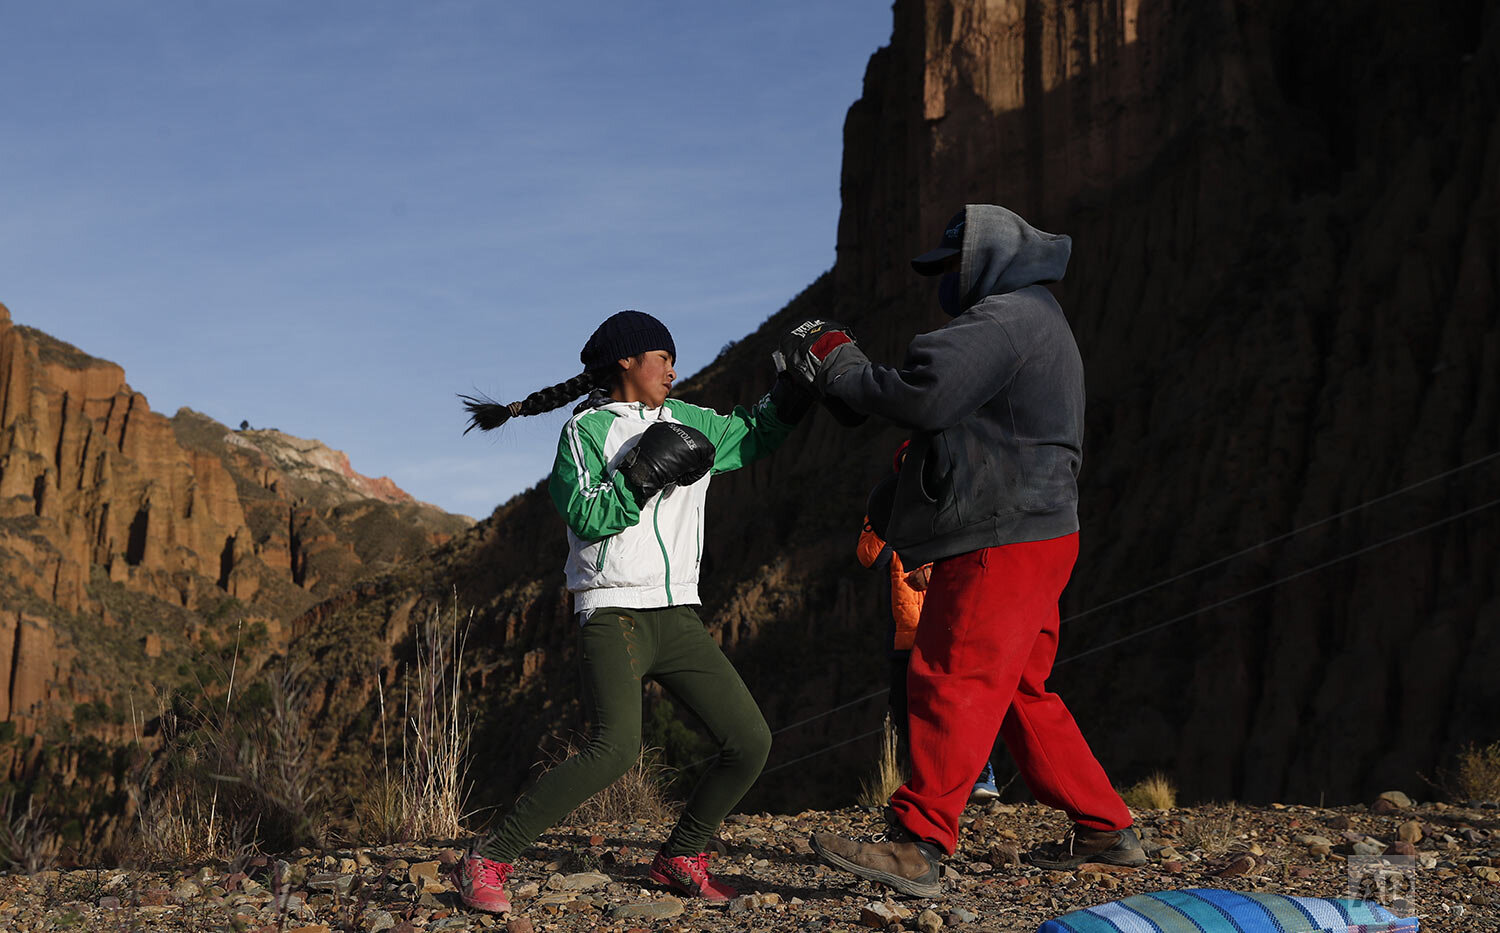  Gracce Kelly Flores, a 12-year-old boxer who goes by the nickname Hand of Stone, does her daily boxing workout as she trains with her father Alberto Flores in Palca, Bolivia June 10, 2021, amid the COVID-19 pandemic. At age 8, Flores defeated a 10-y